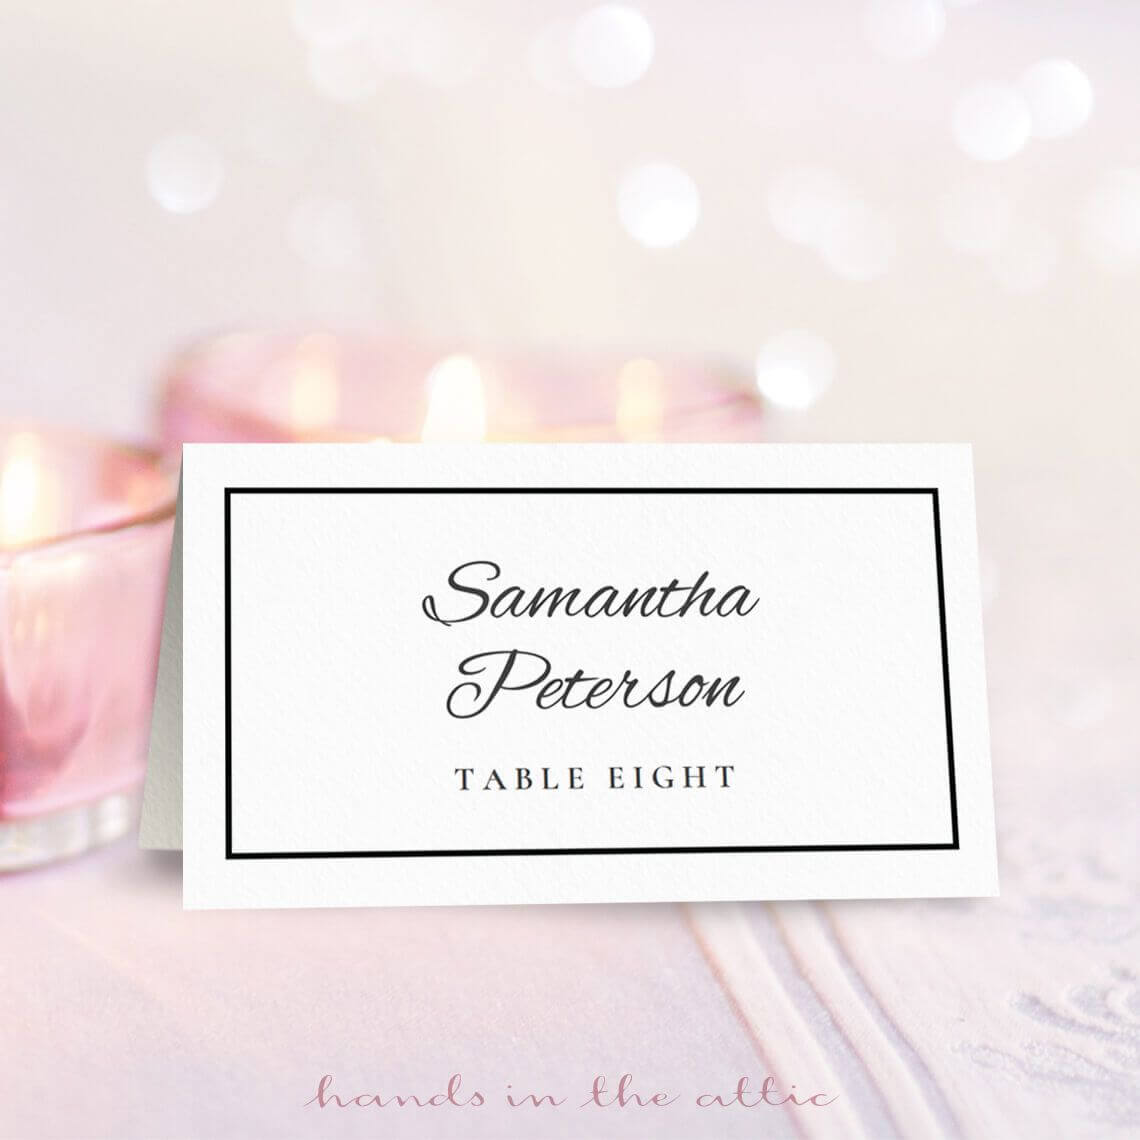 8-free-wedding-place-card-templates-for-place-card-template-free-6-per-page-professional